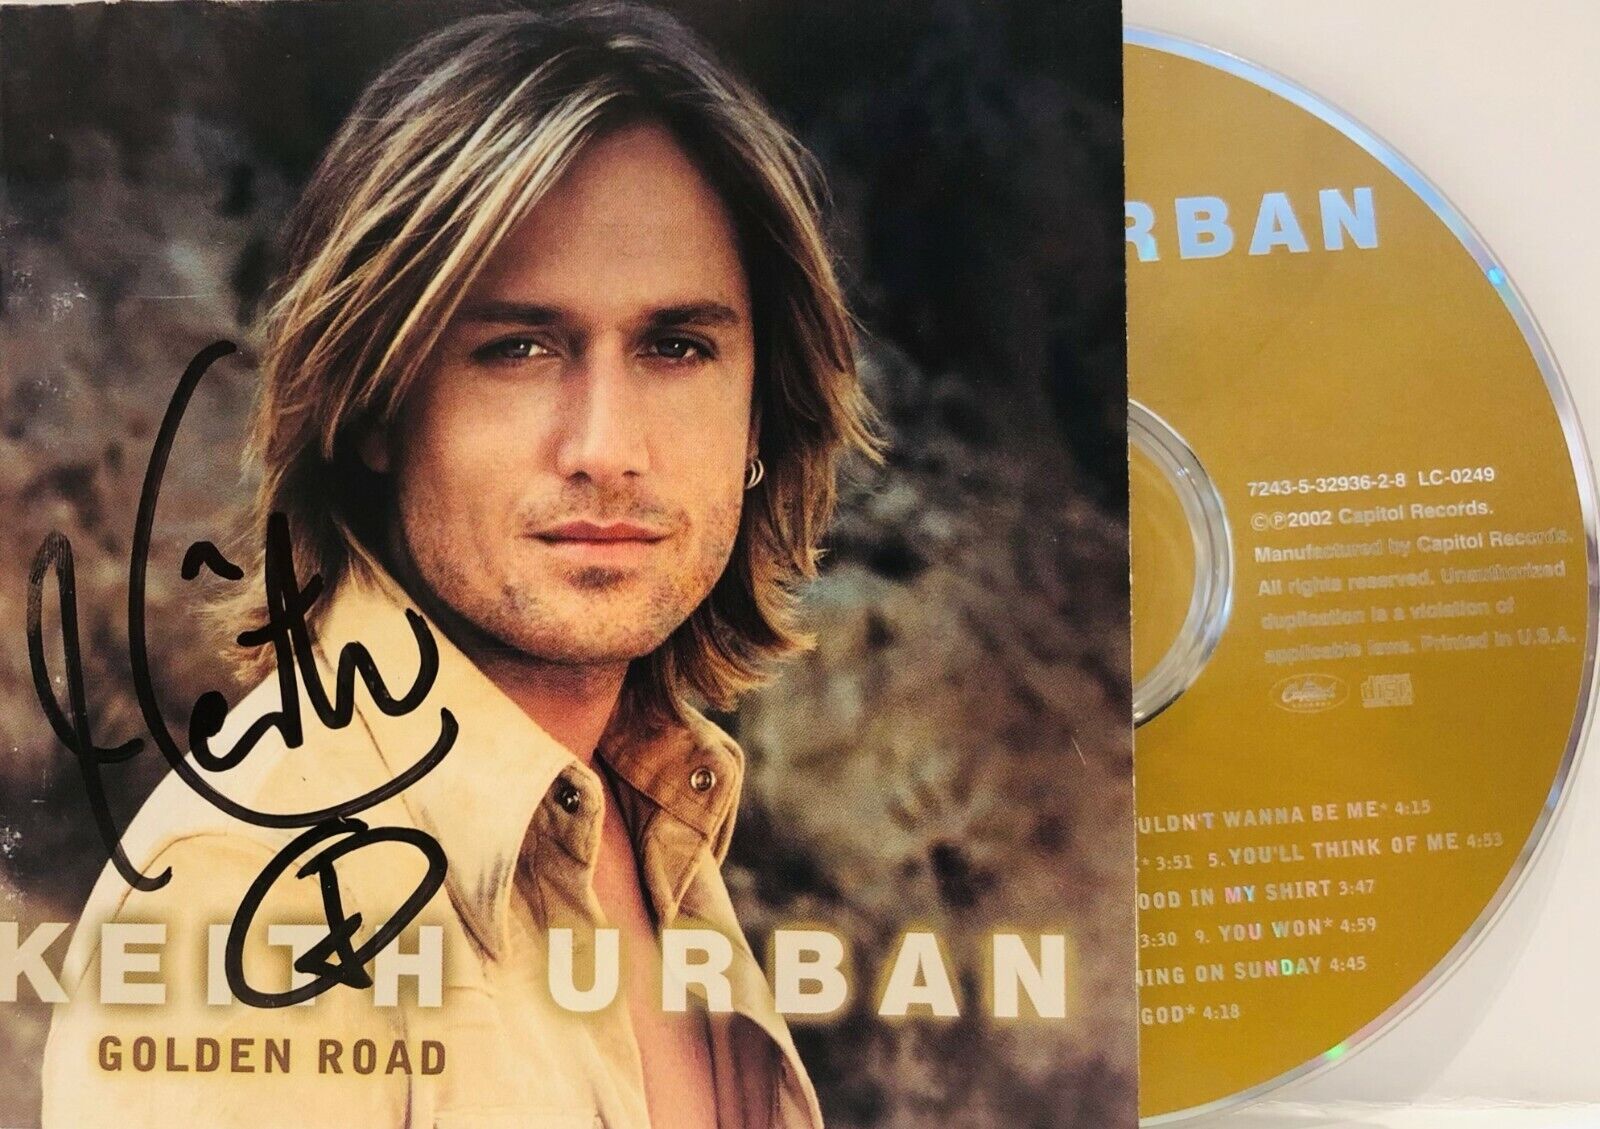 KEITH URBAN Signed Autograph CD Cover Insert 